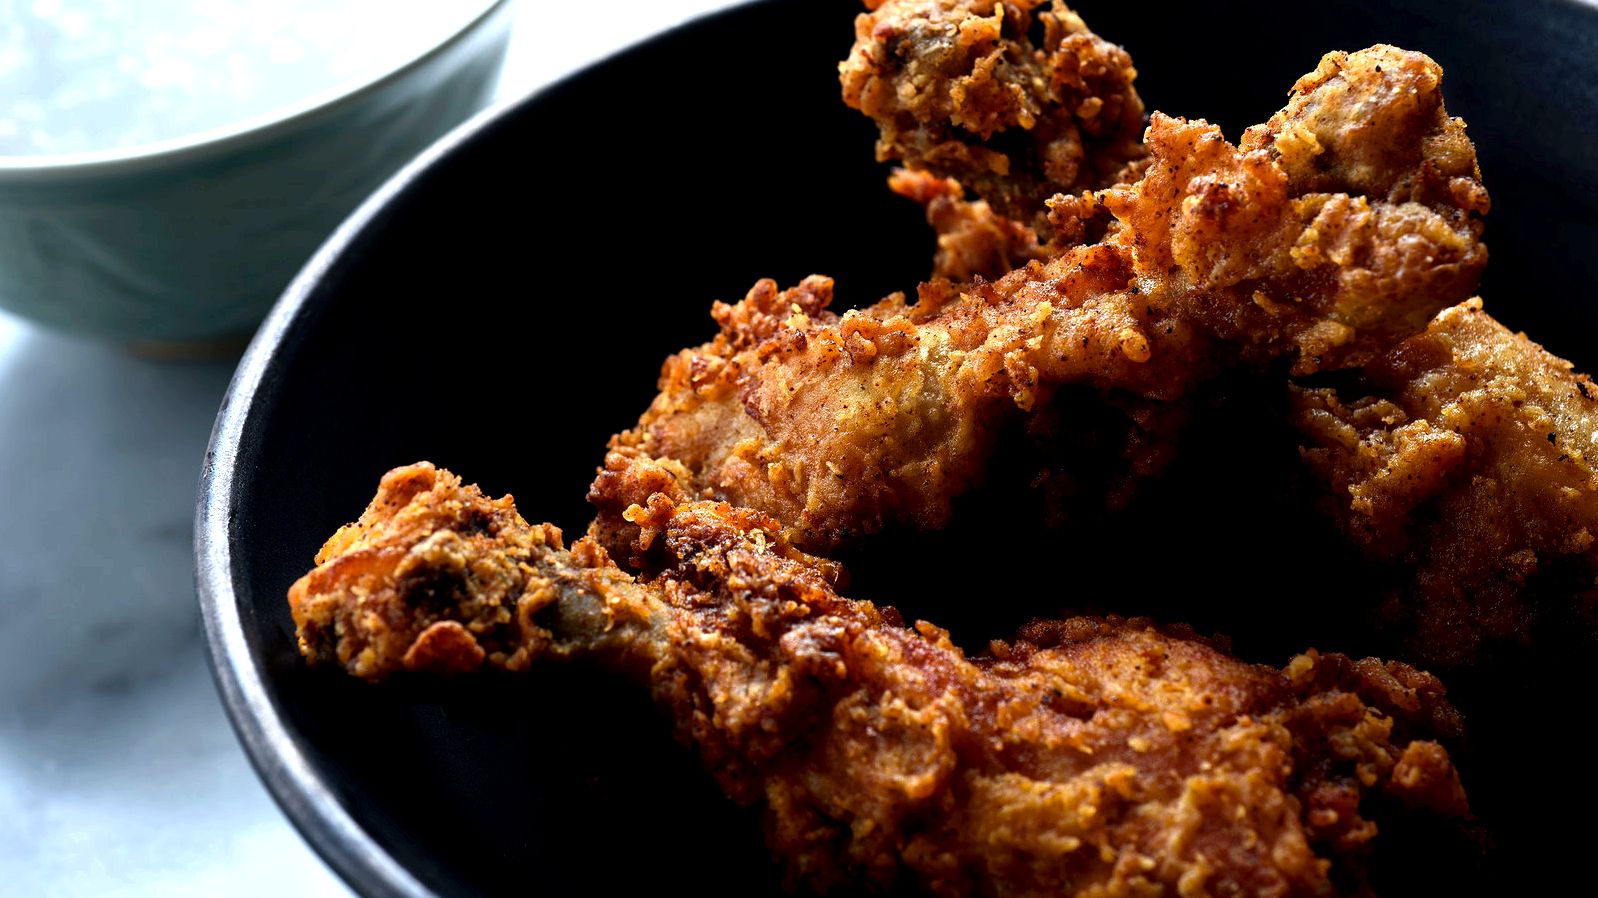 Steps to make fried chicken - nyt cooking of the couple of